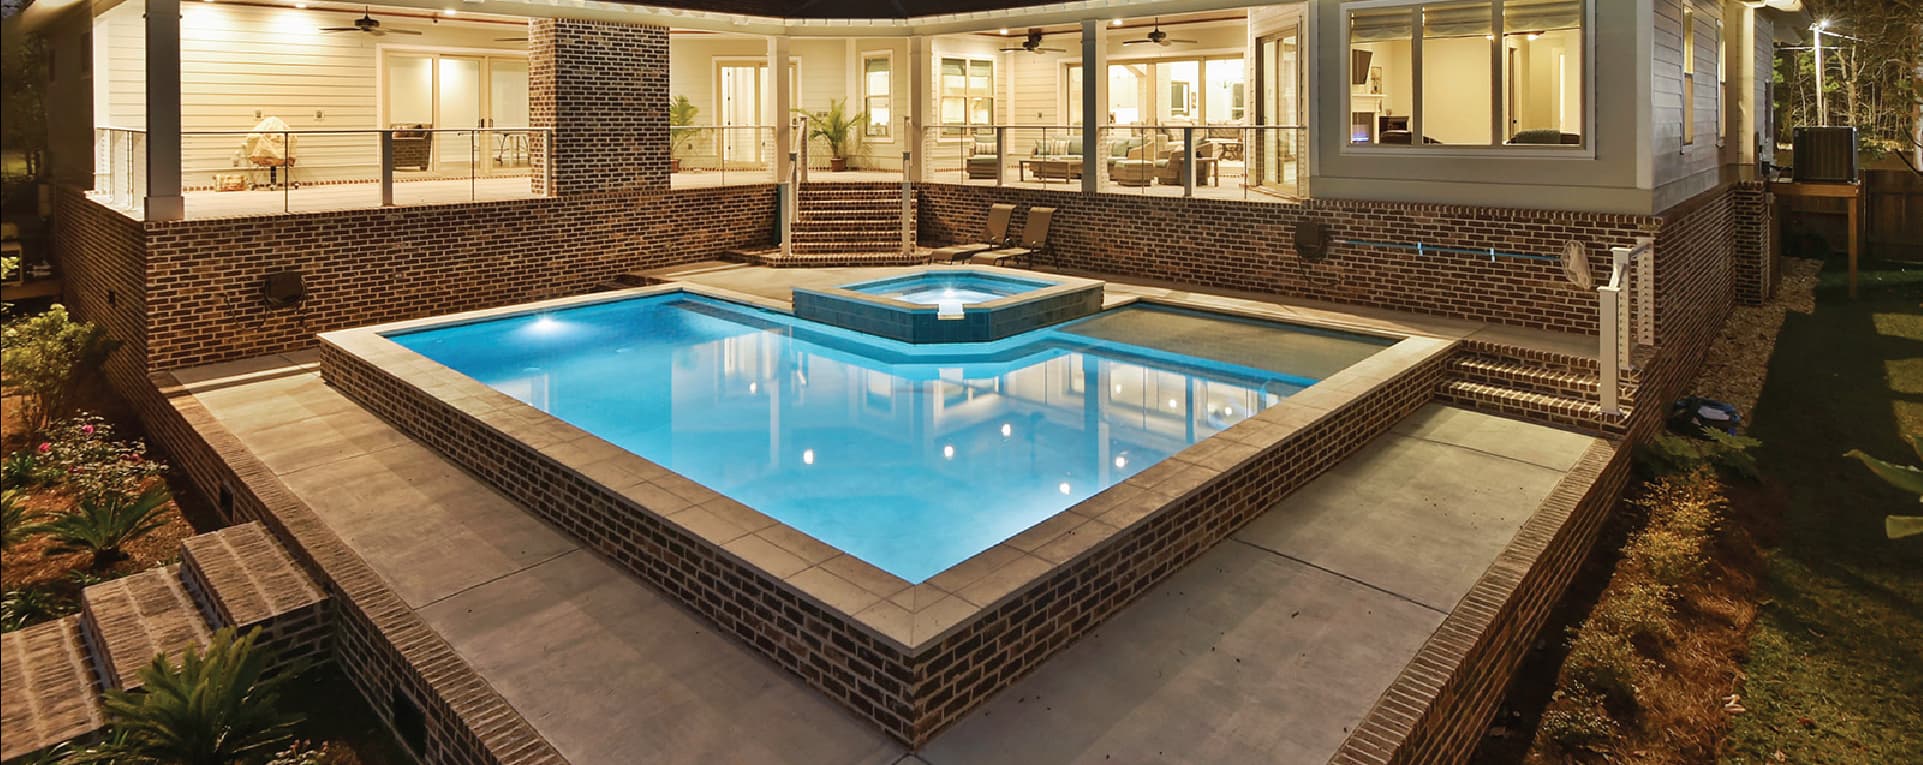 Custom pool with attached hot tub